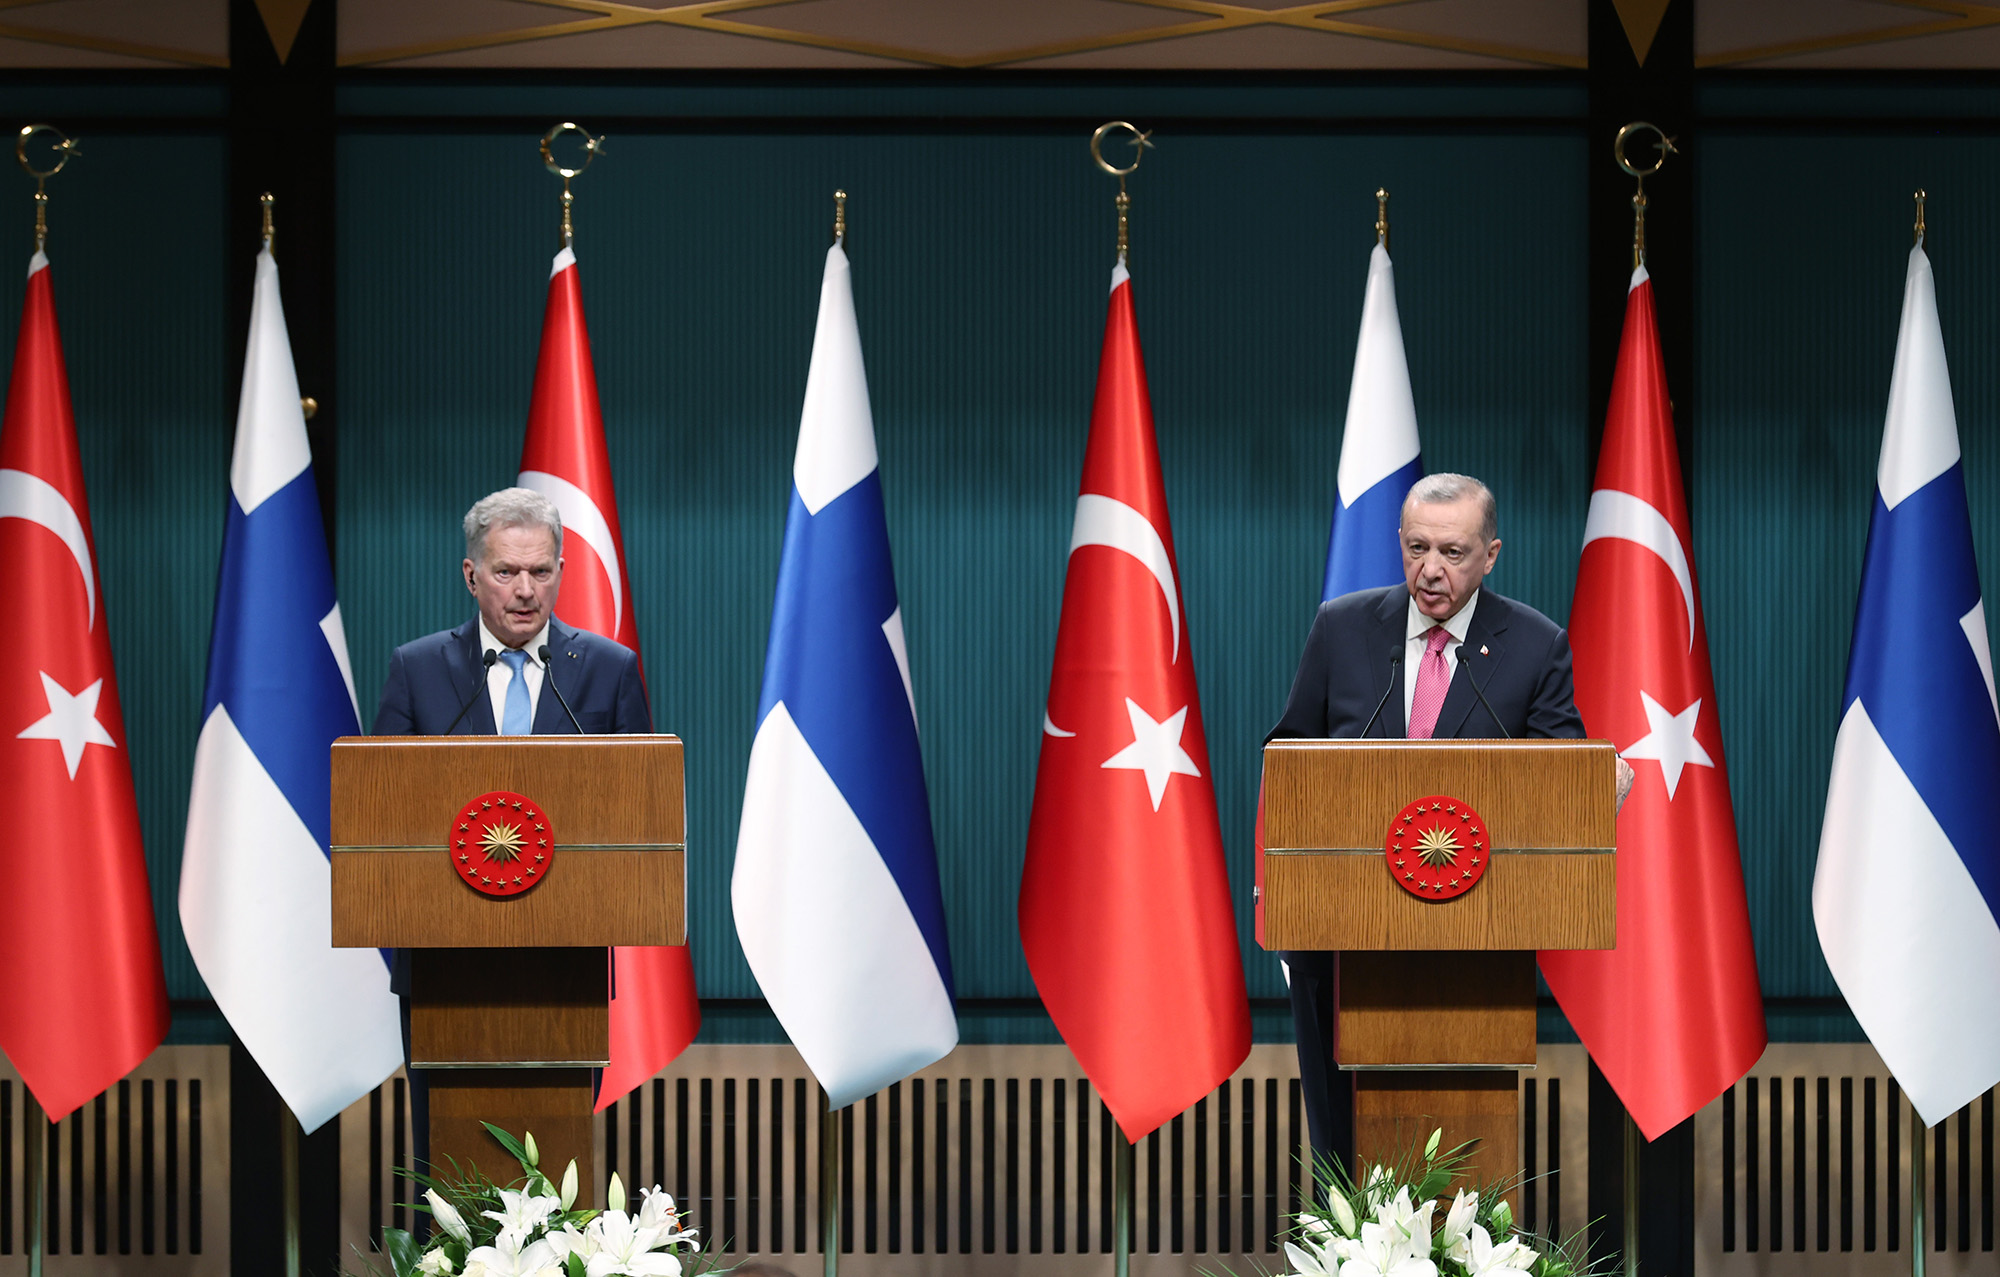 Turkish President Recep Tayyip Erdogan, right, and Finnish President Sauli Niinisto hold a joint news conference at Presidential Complex in Ankara, Turkey, on March 17.